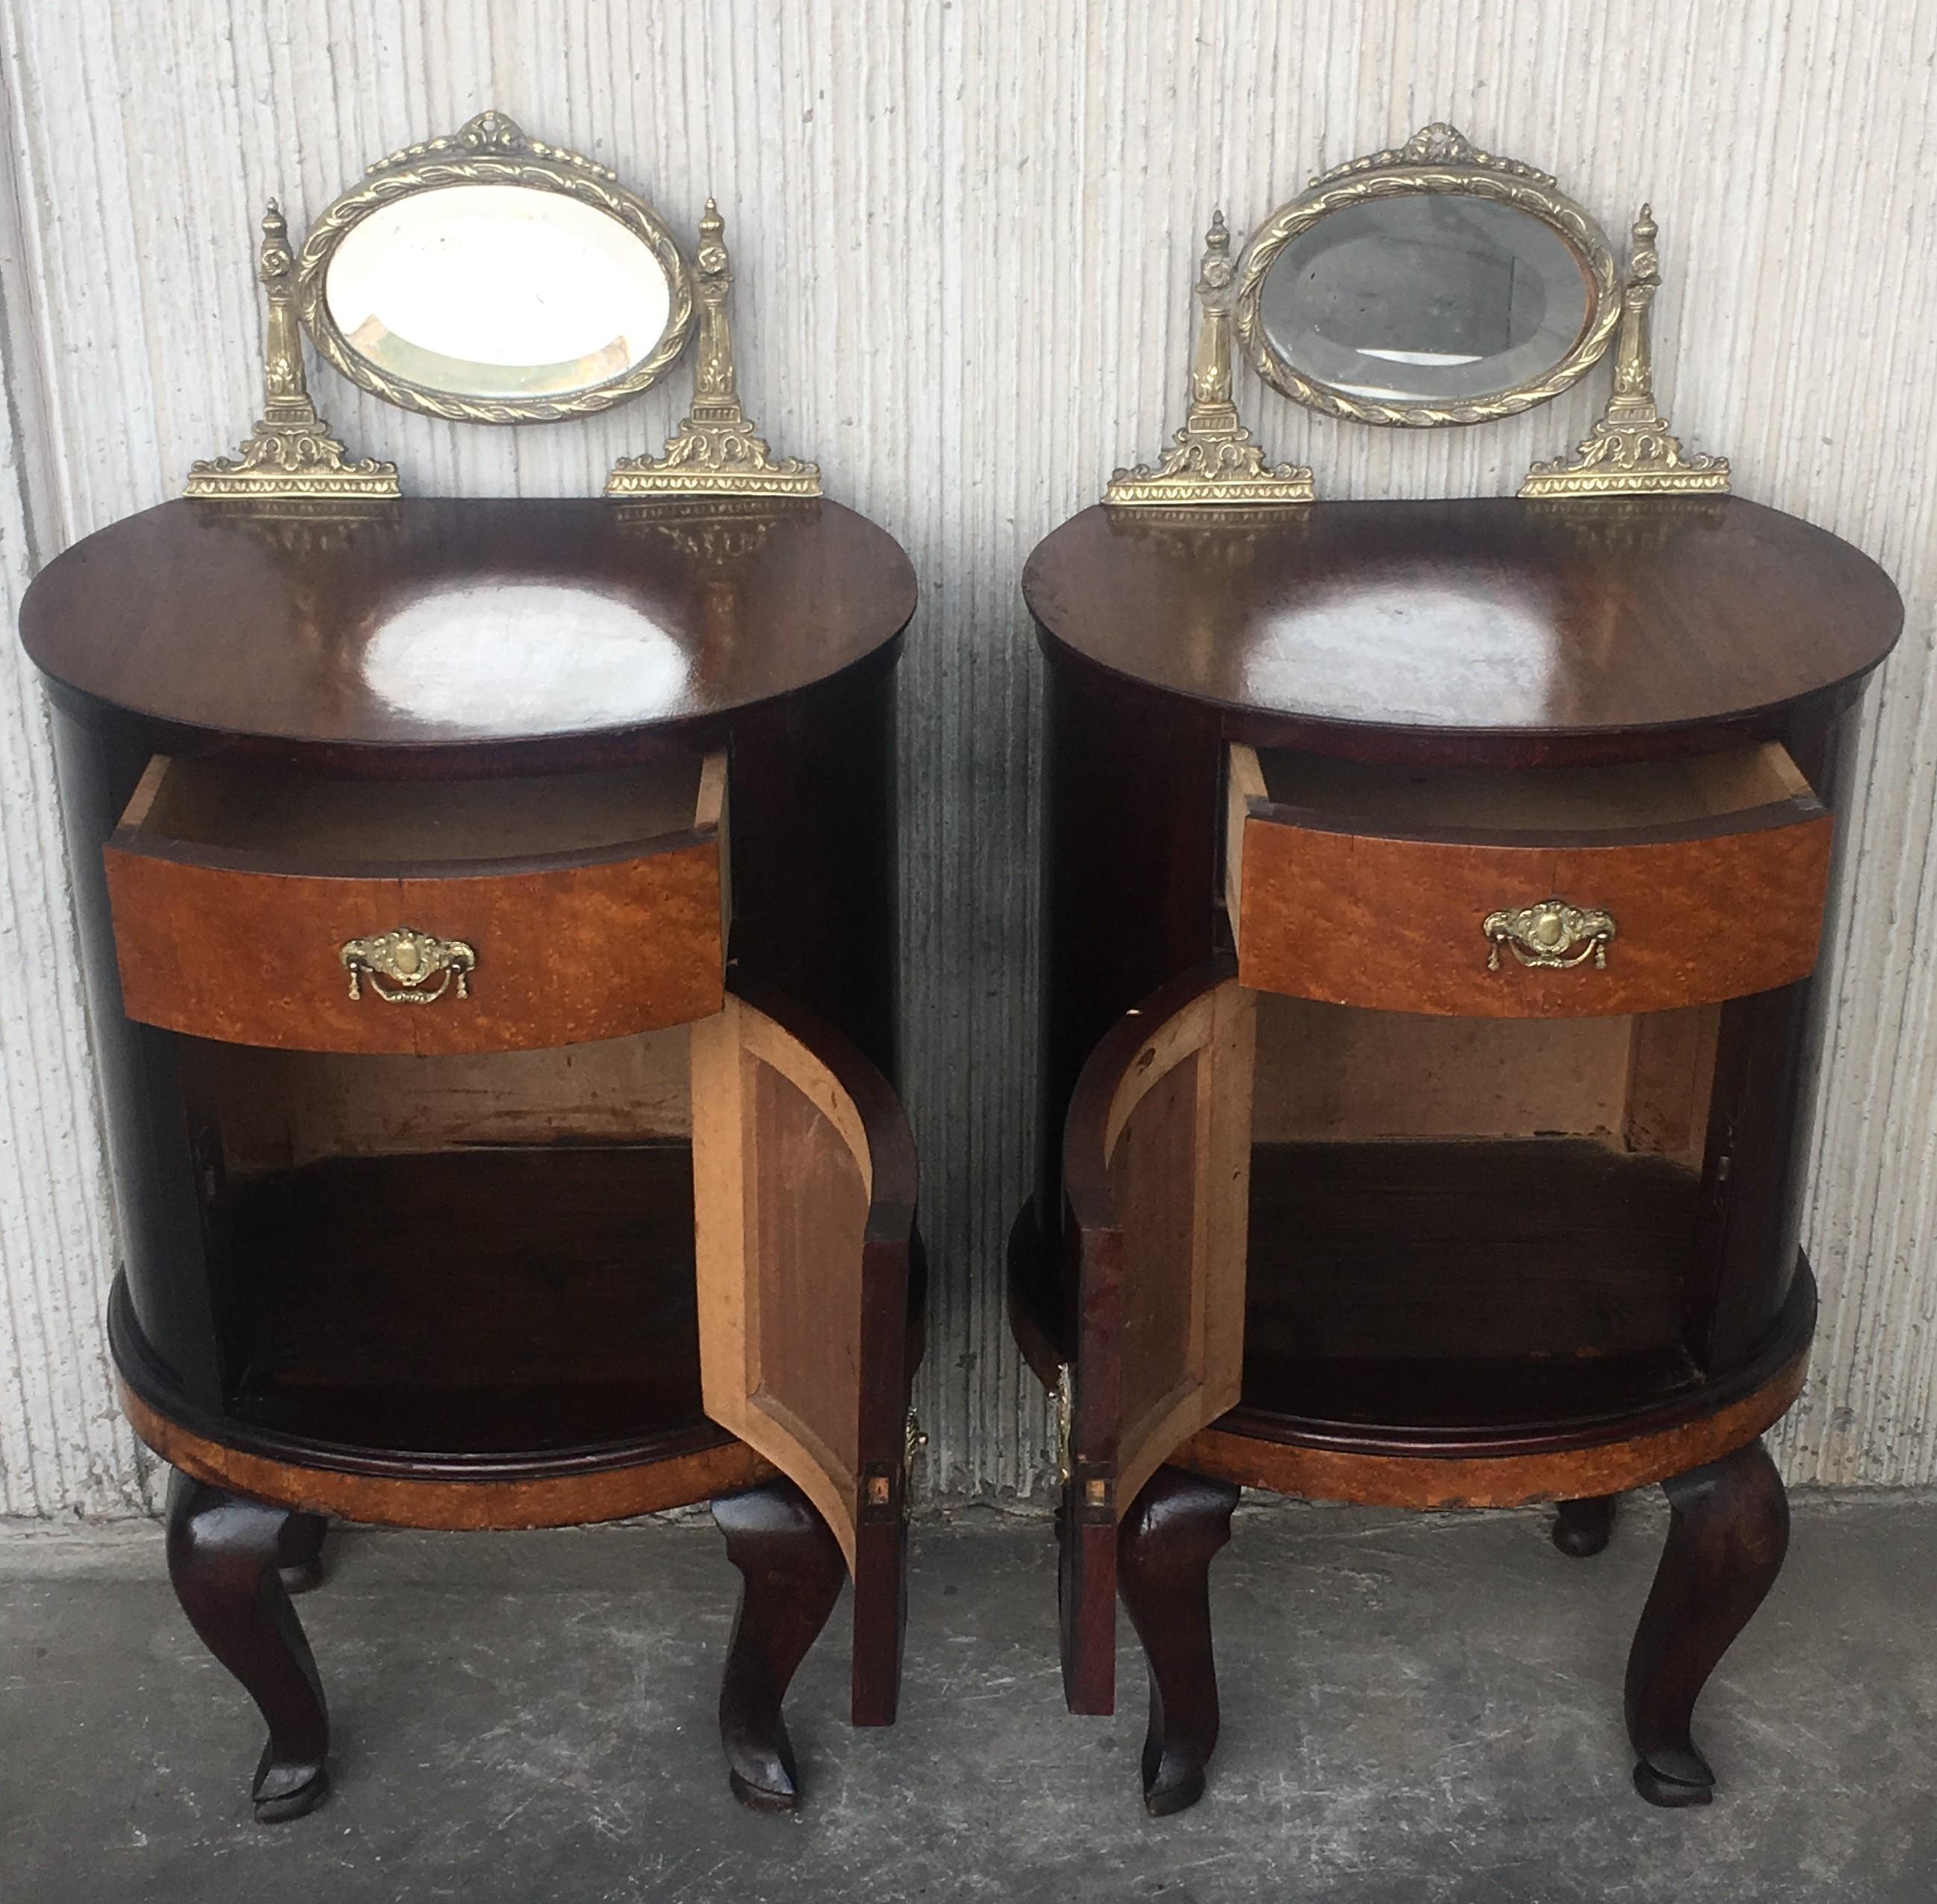 Art Deco Style Marquetry Nightstands with Metal and Mirror Crest, Pair (Intarsie)